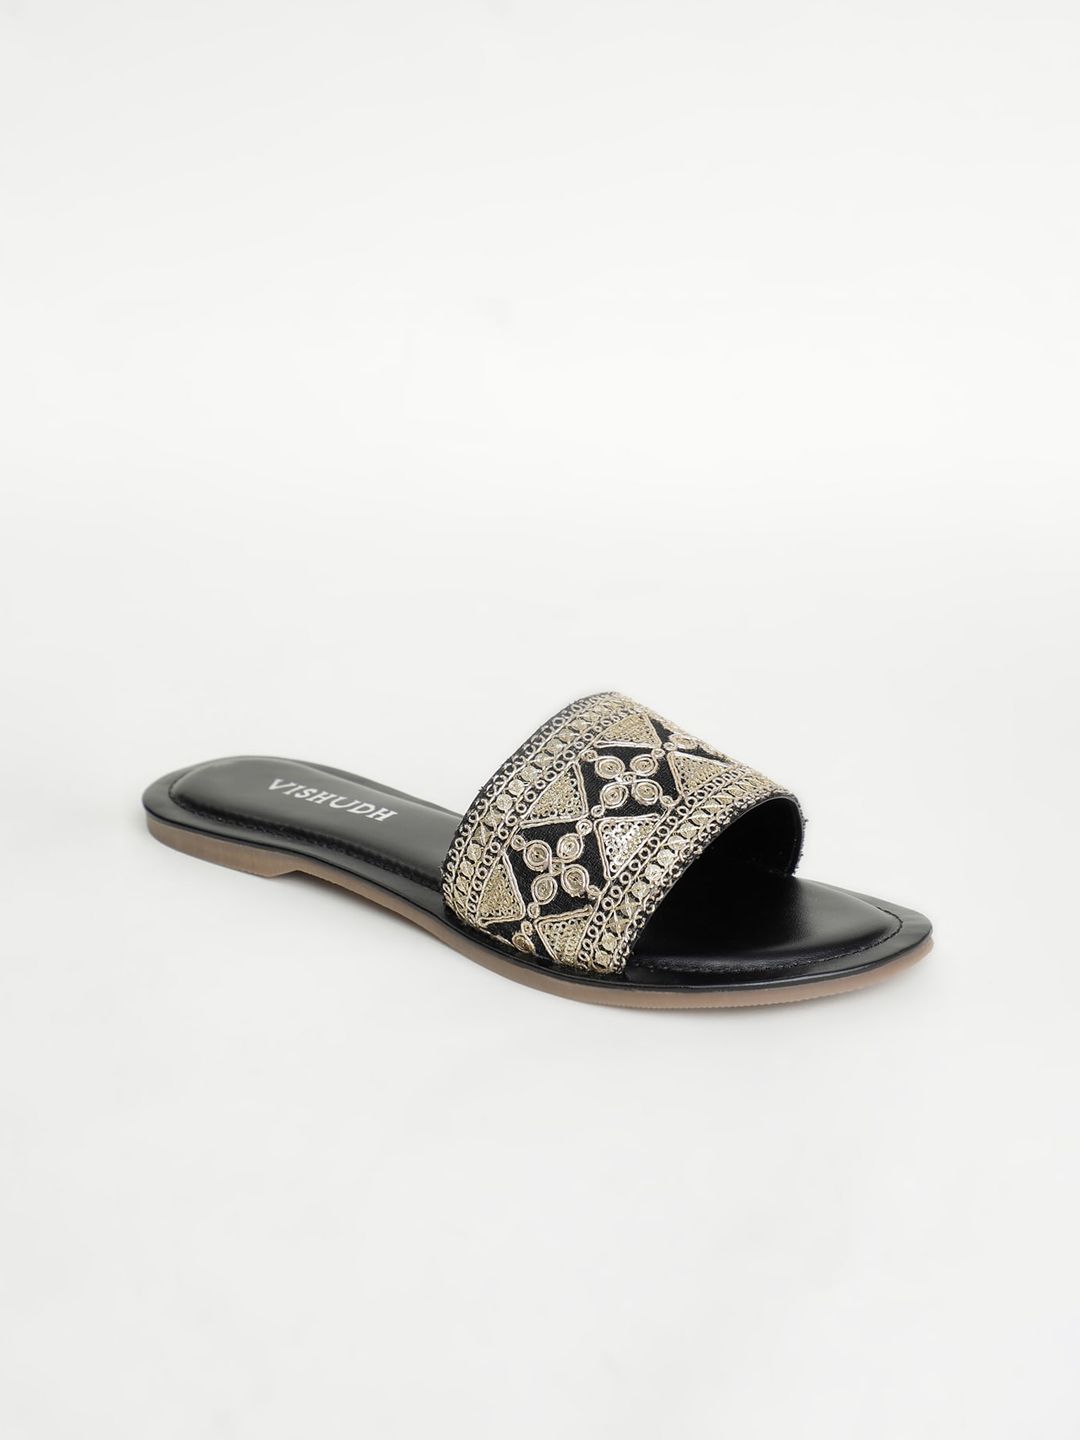 Vishudh Women Black & Silver-Toned Embellished Open Toe Flats Price in India